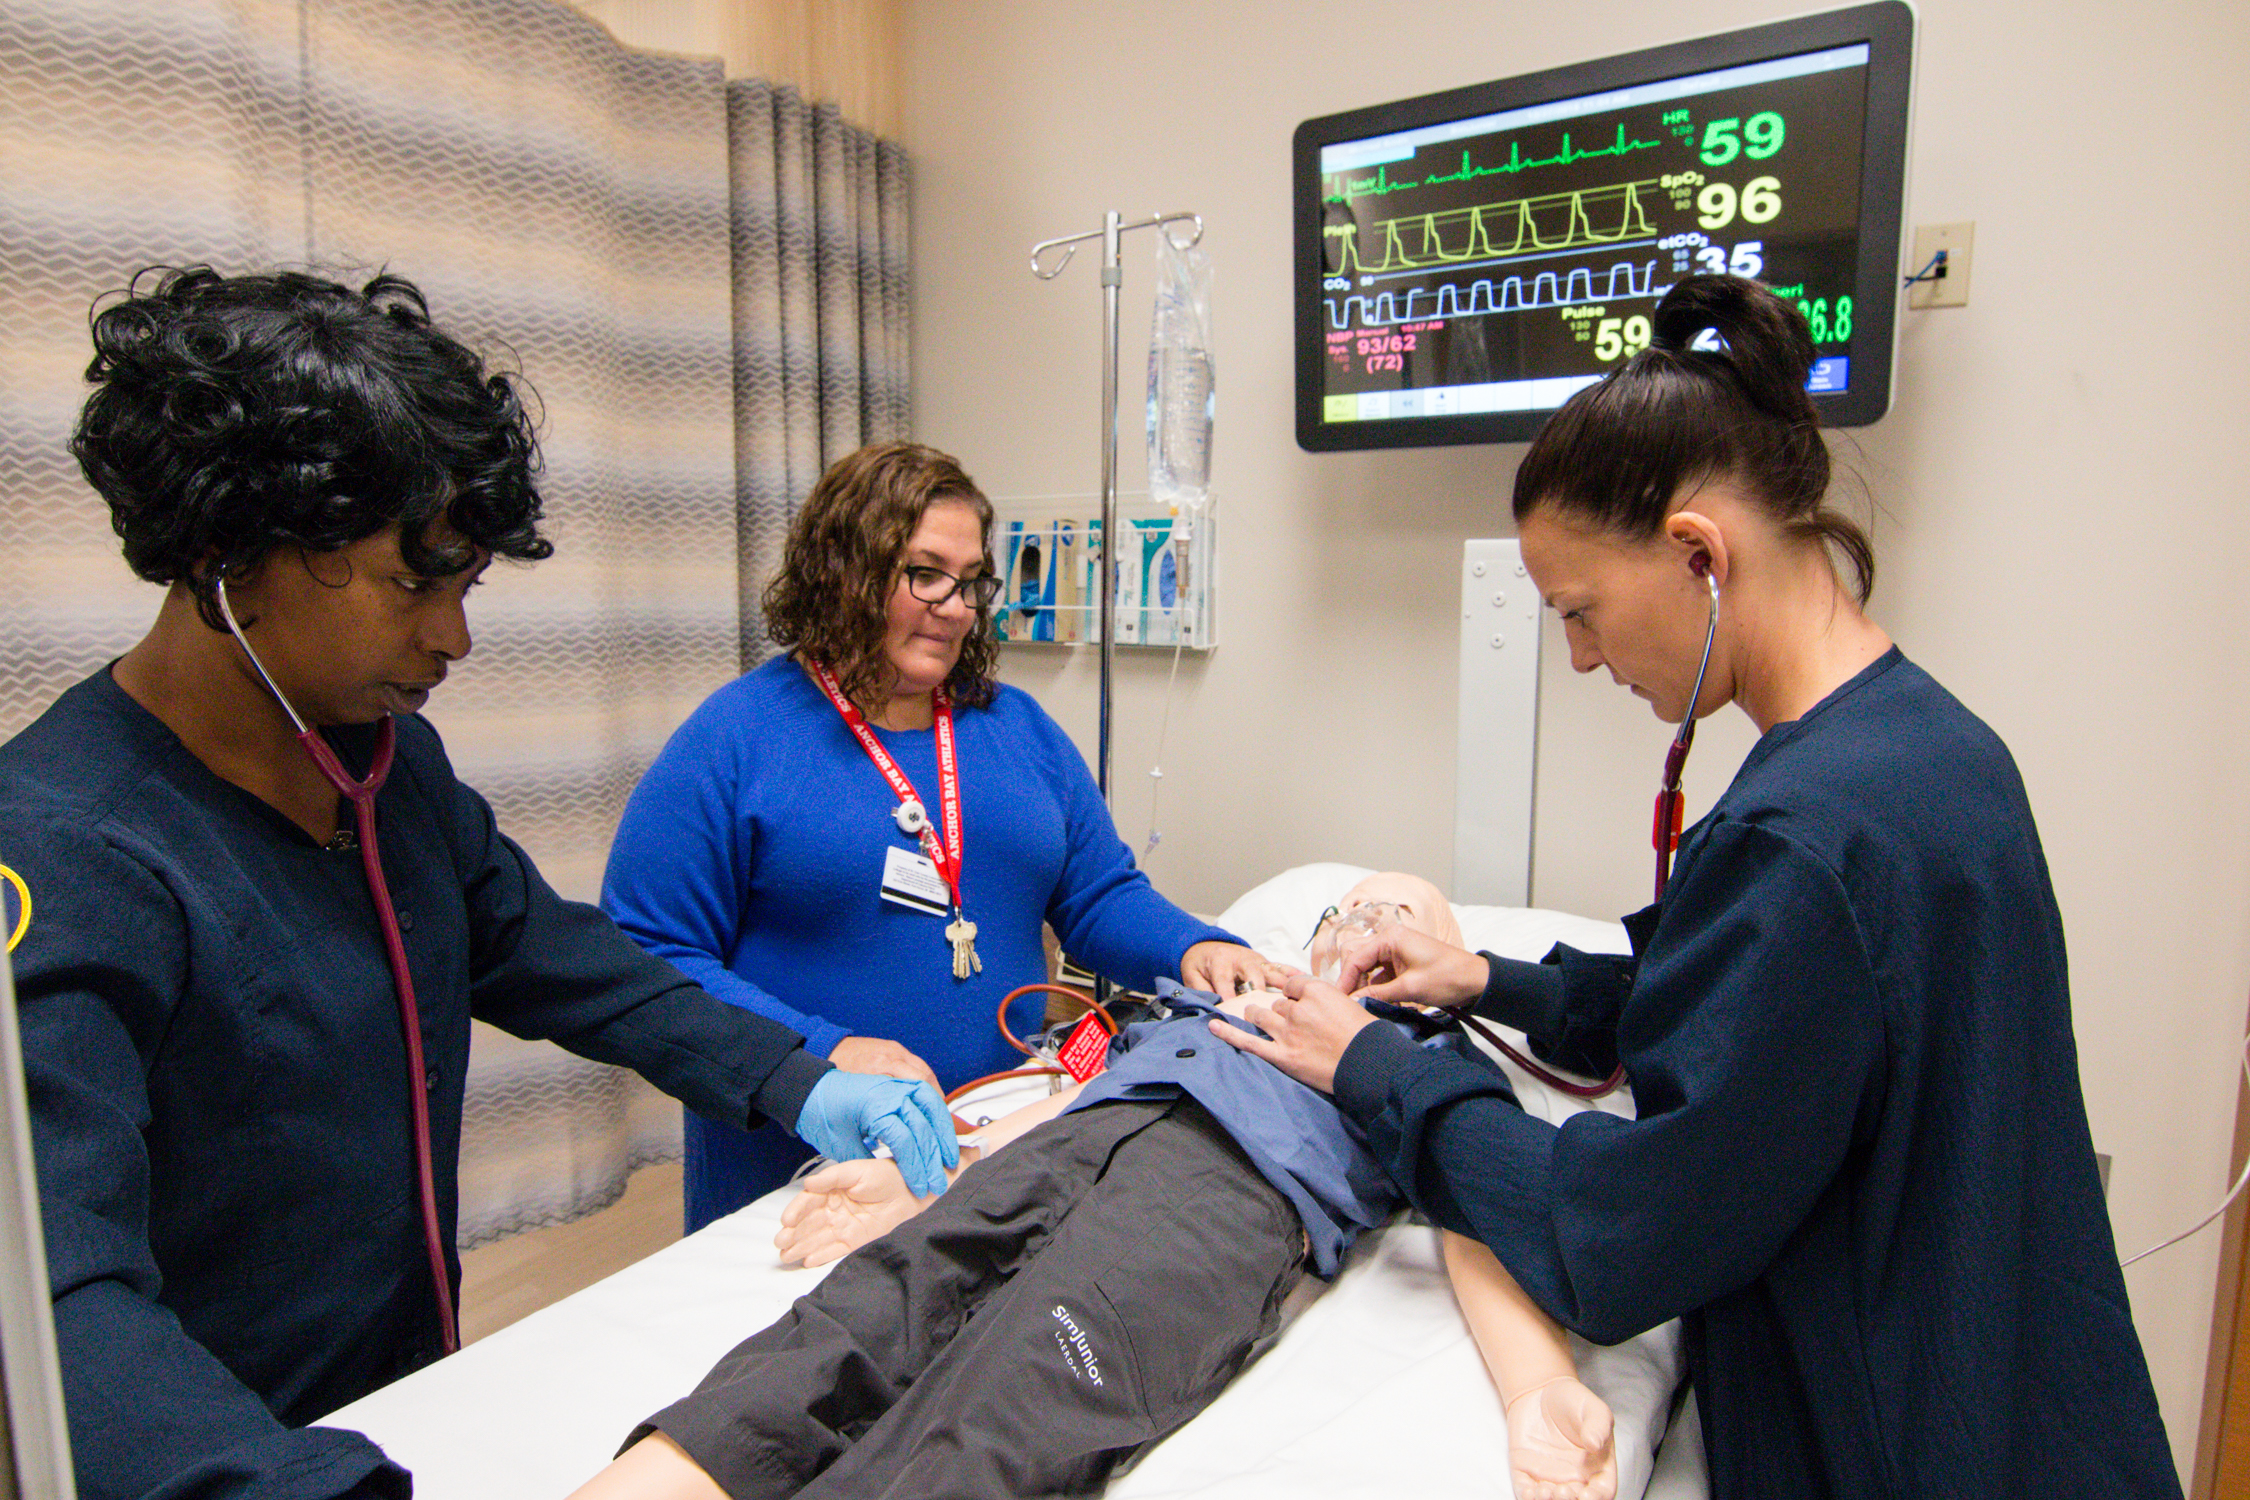 SC4 to hold free group advising sessions for nursing, HIT programs Feb. 14